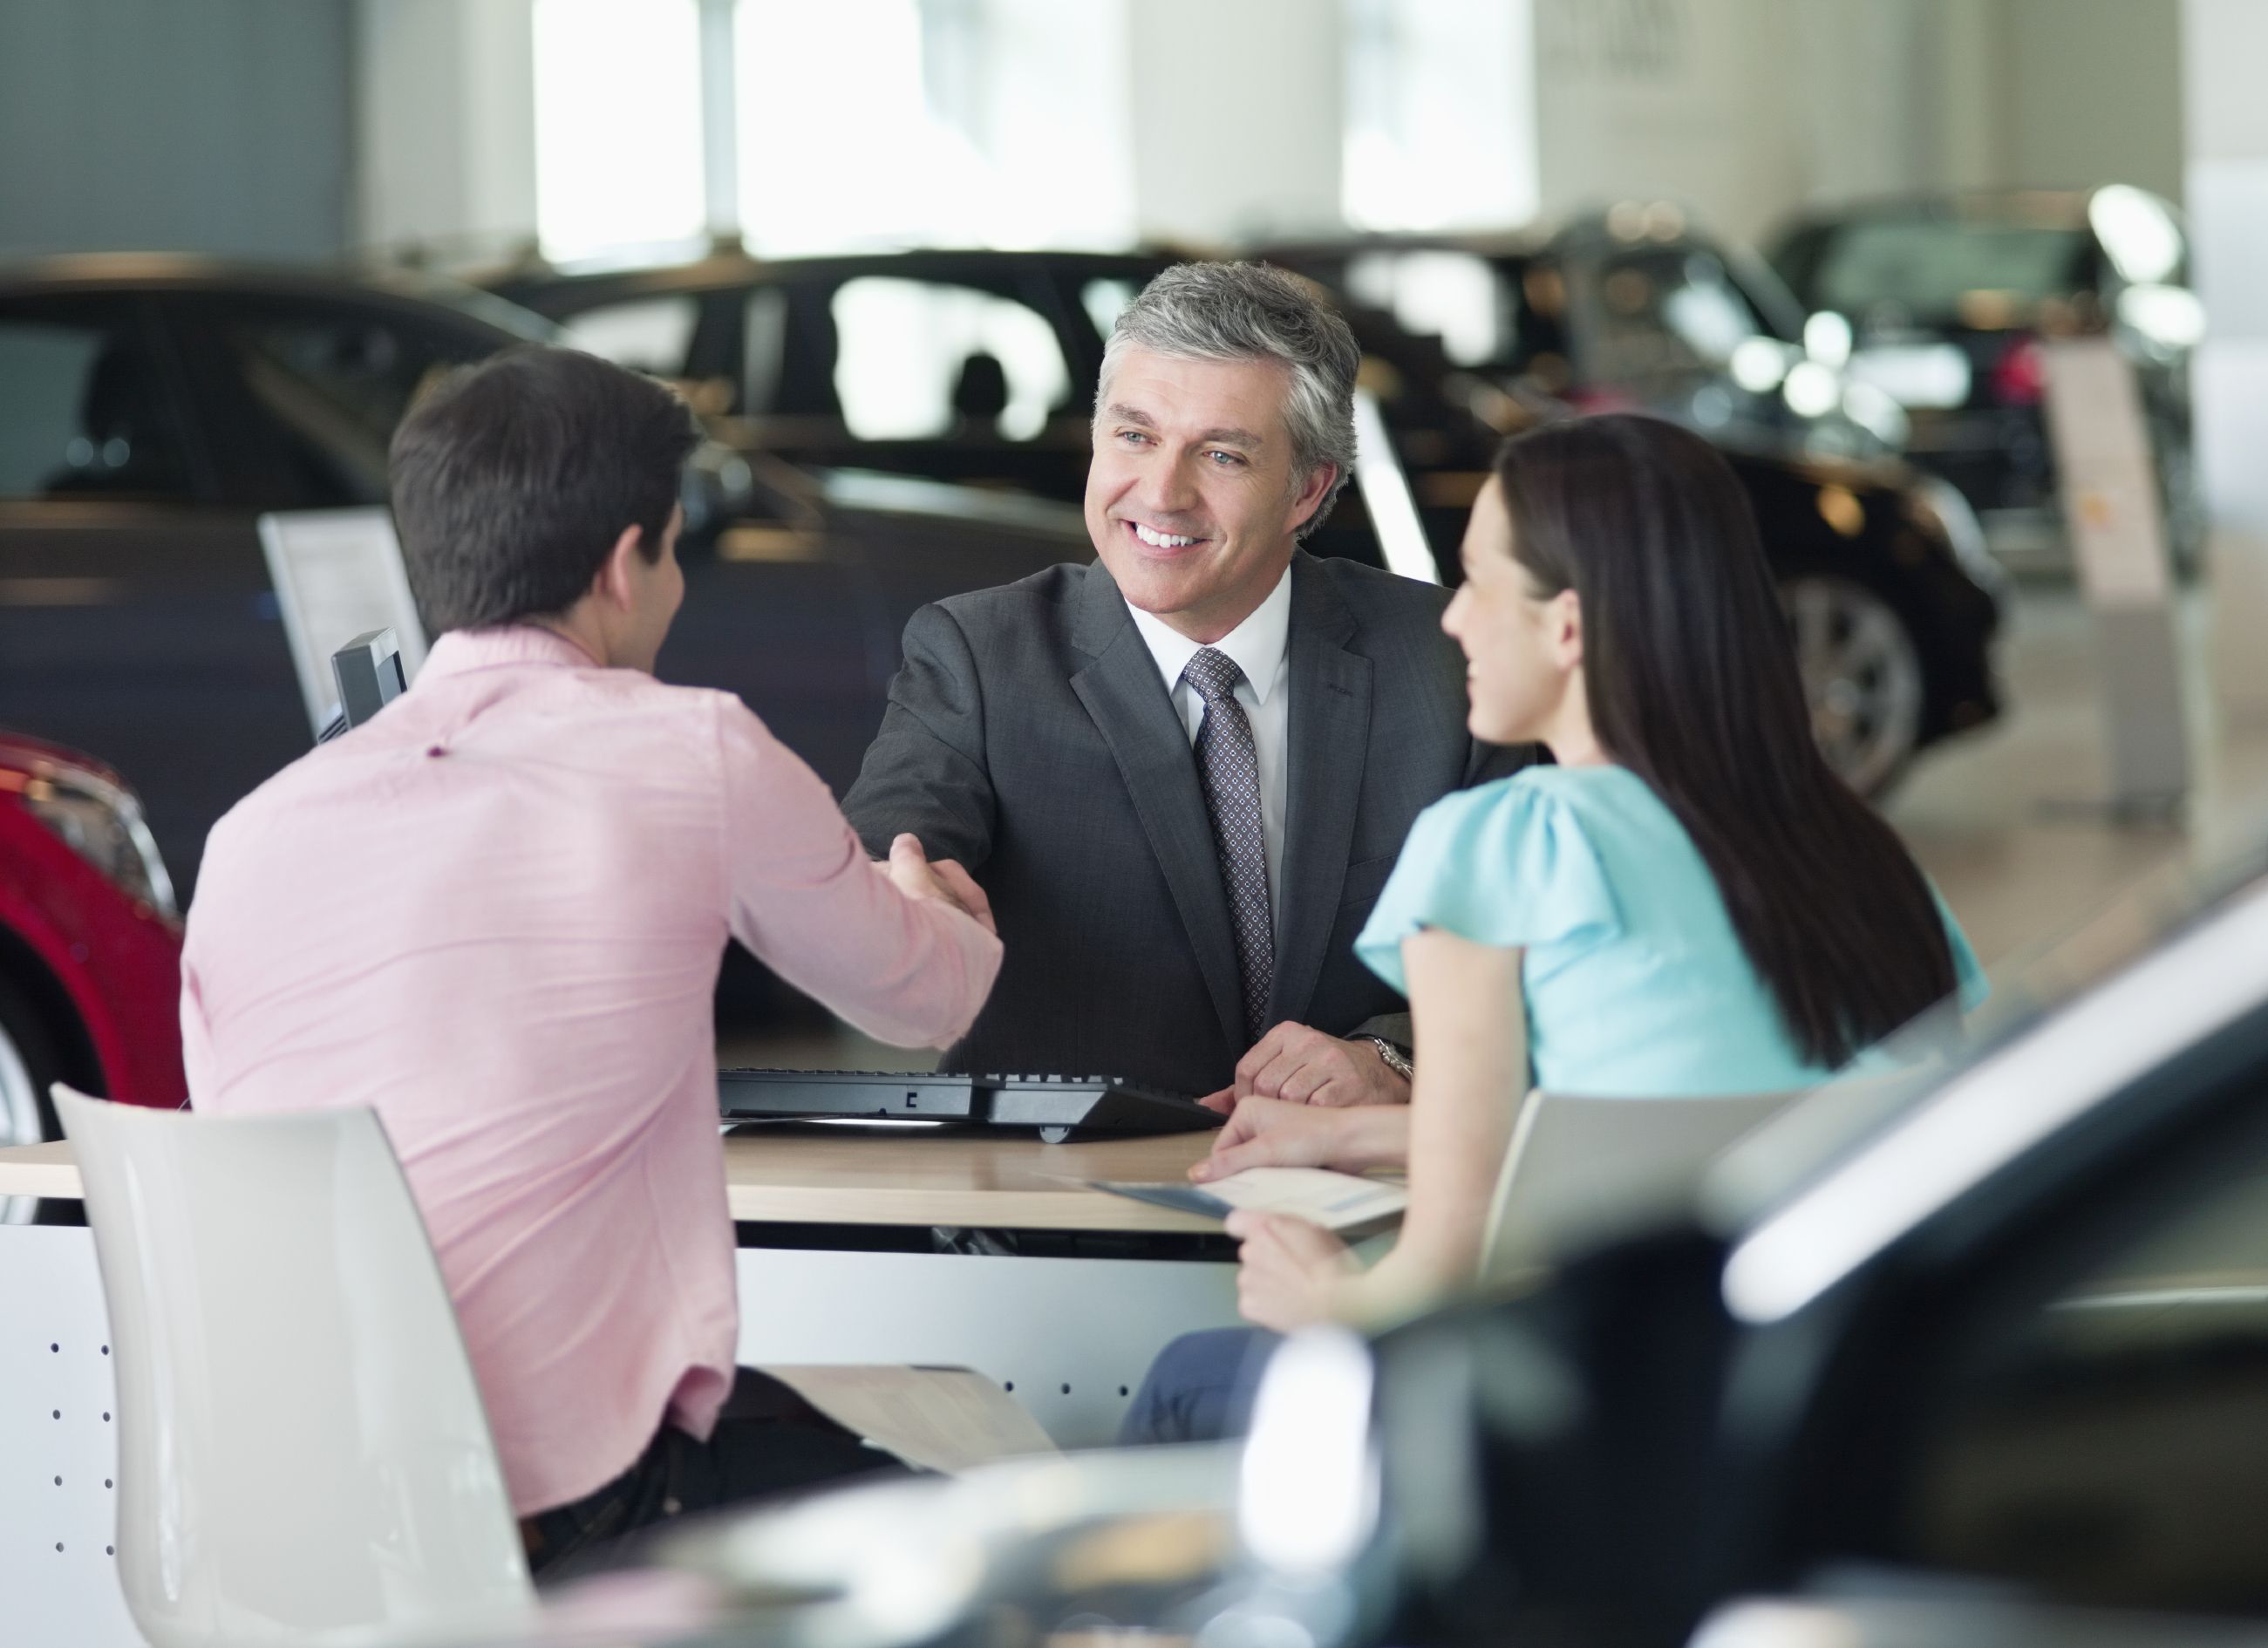 Image of car salesman with man and woman